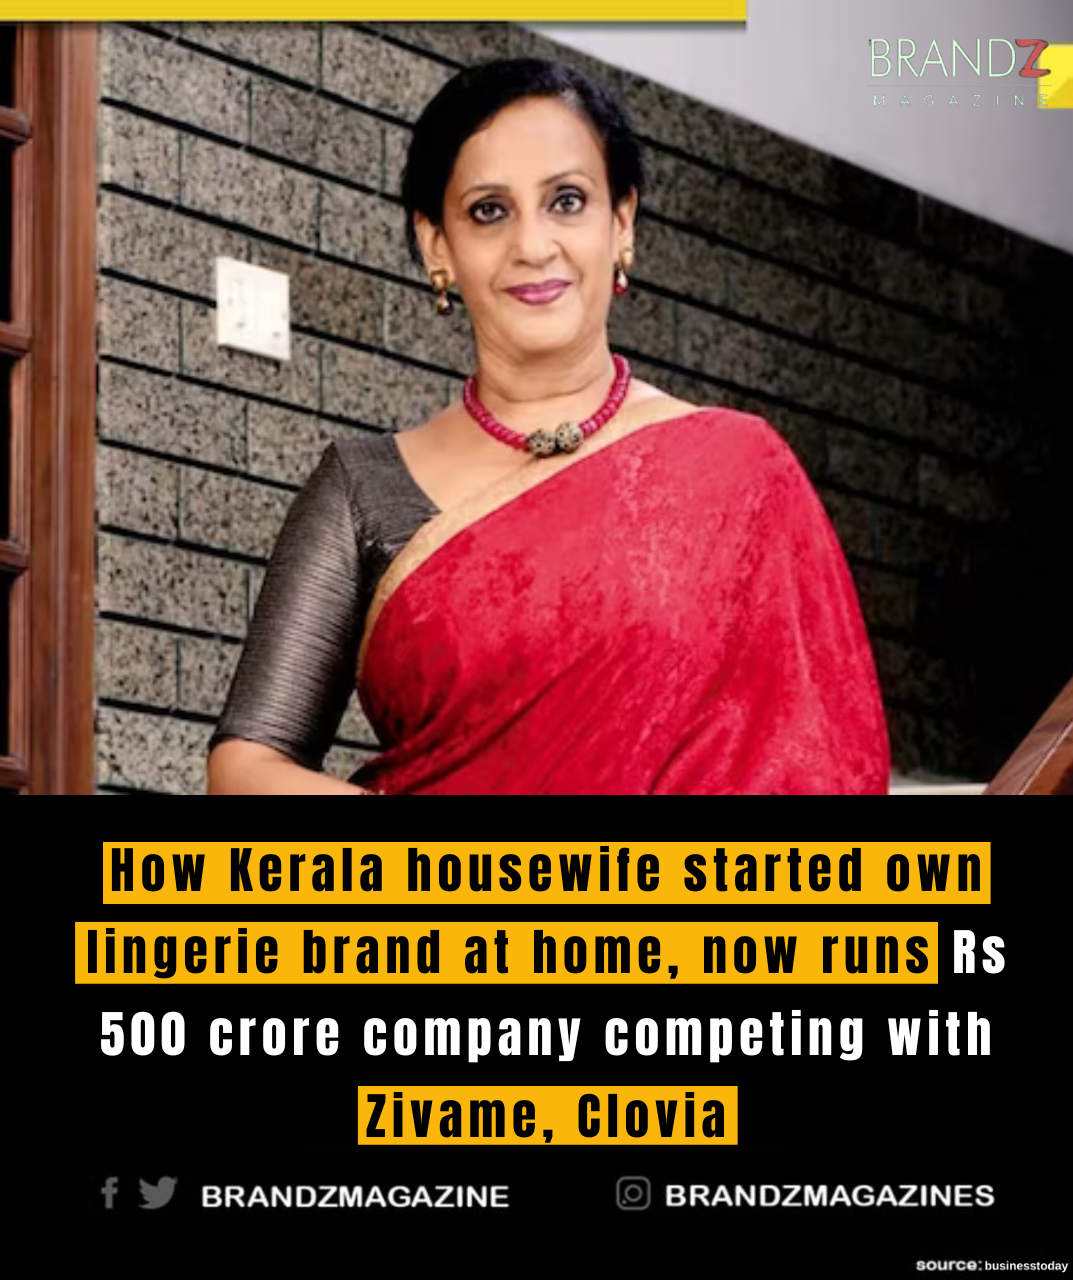 How Kerala housewife started own lingerie brand at home, now runs